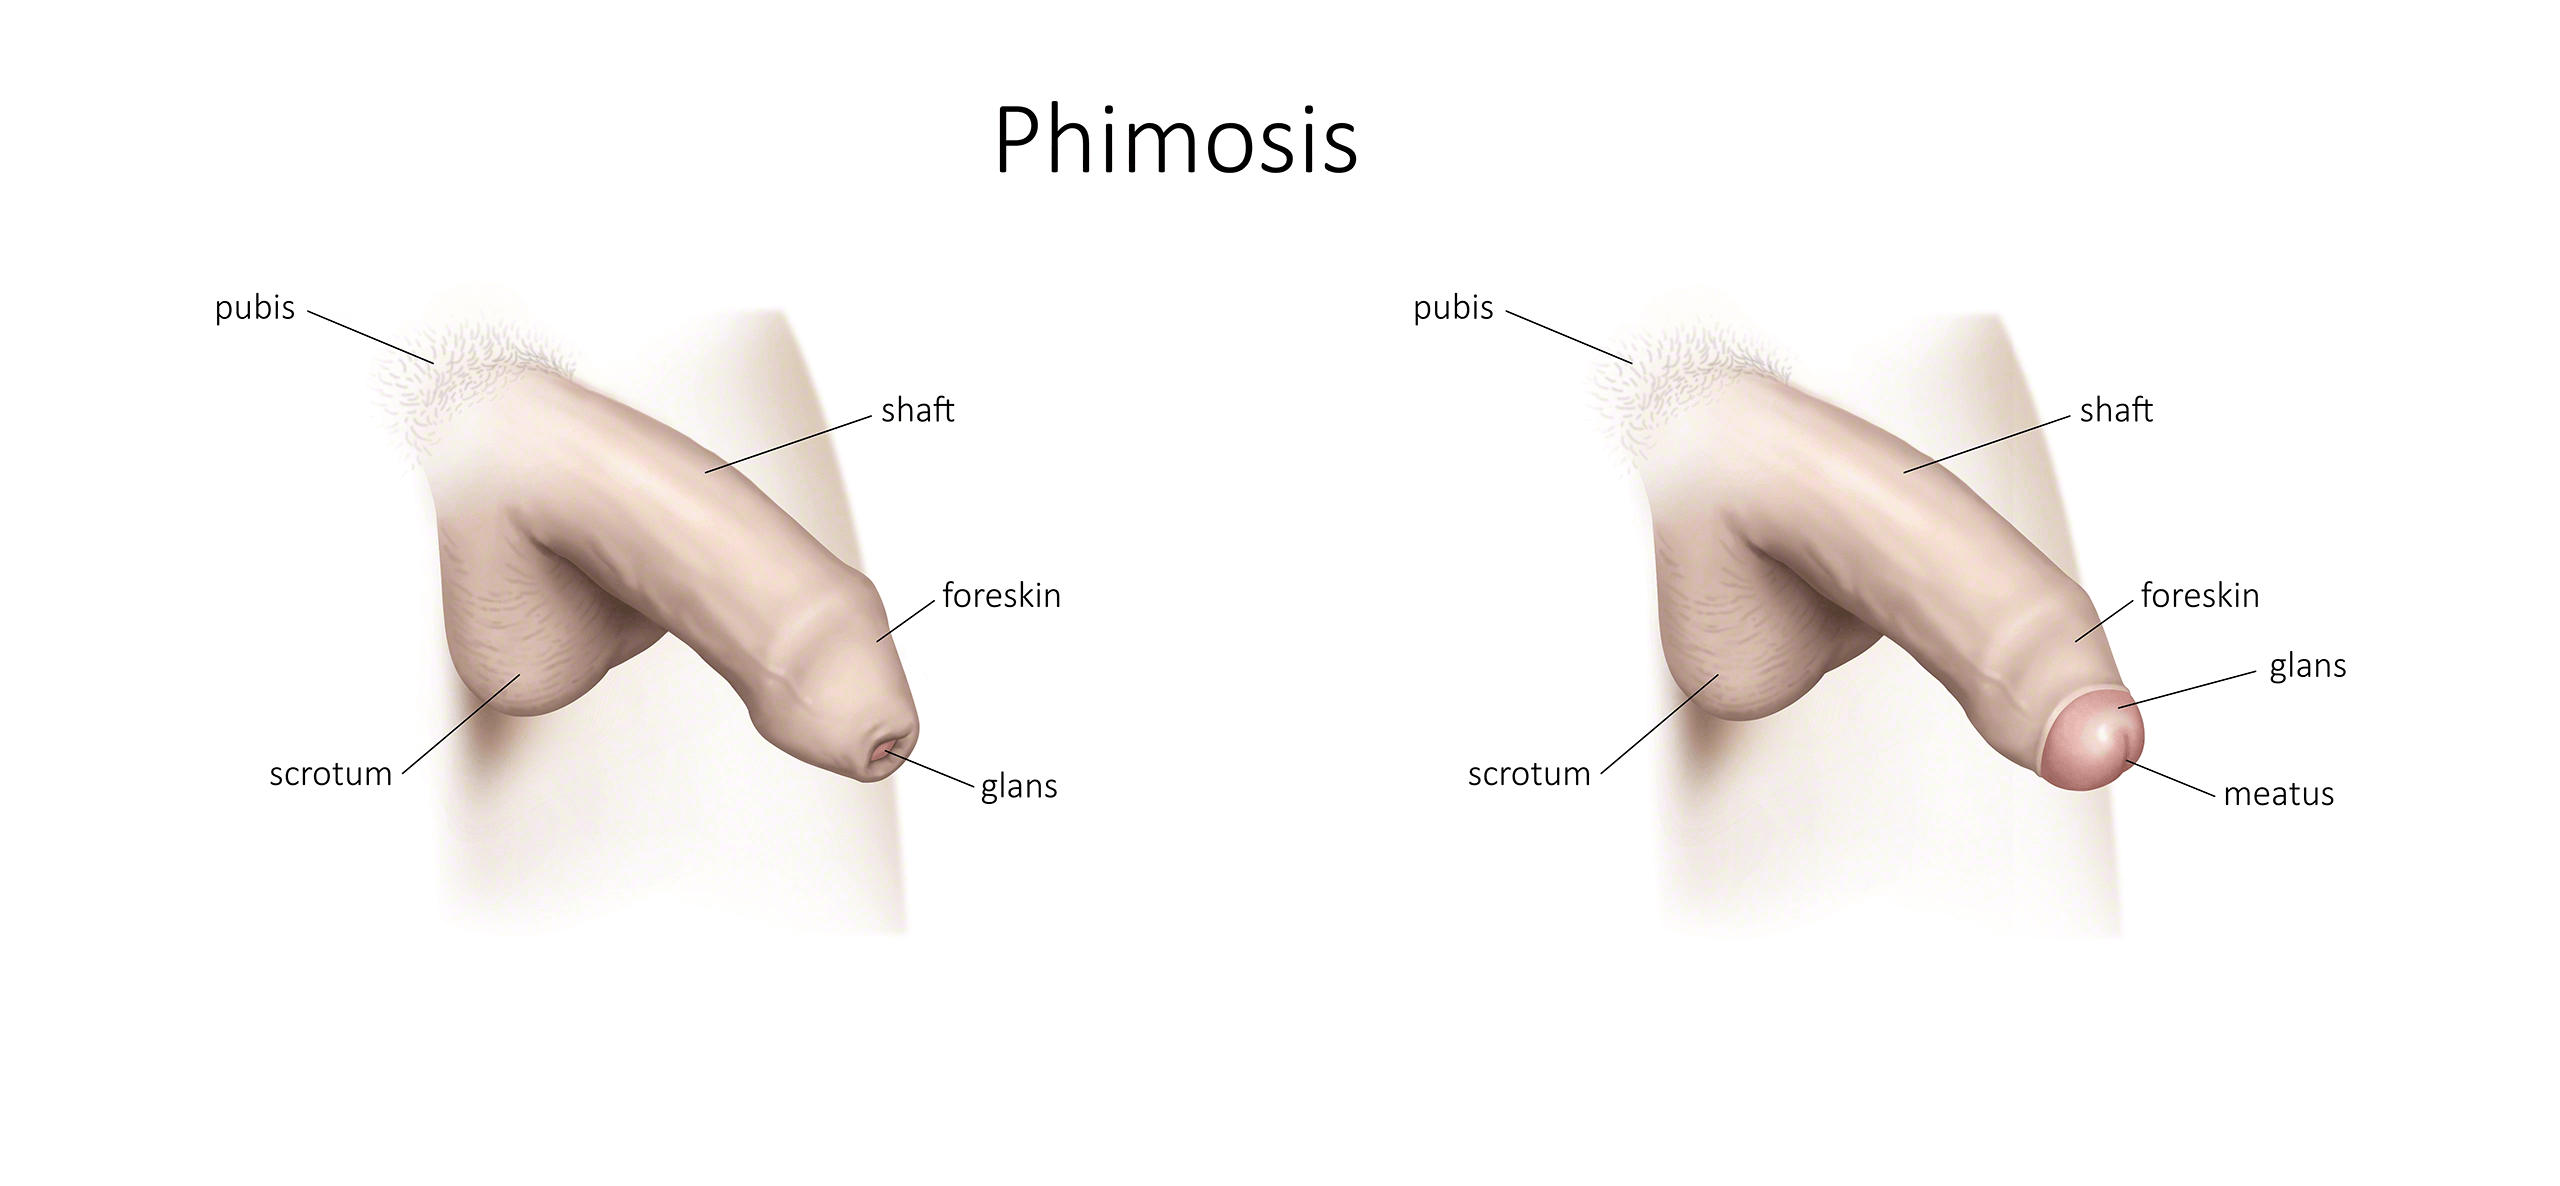 Phimosis Treatment without surgery, Causes